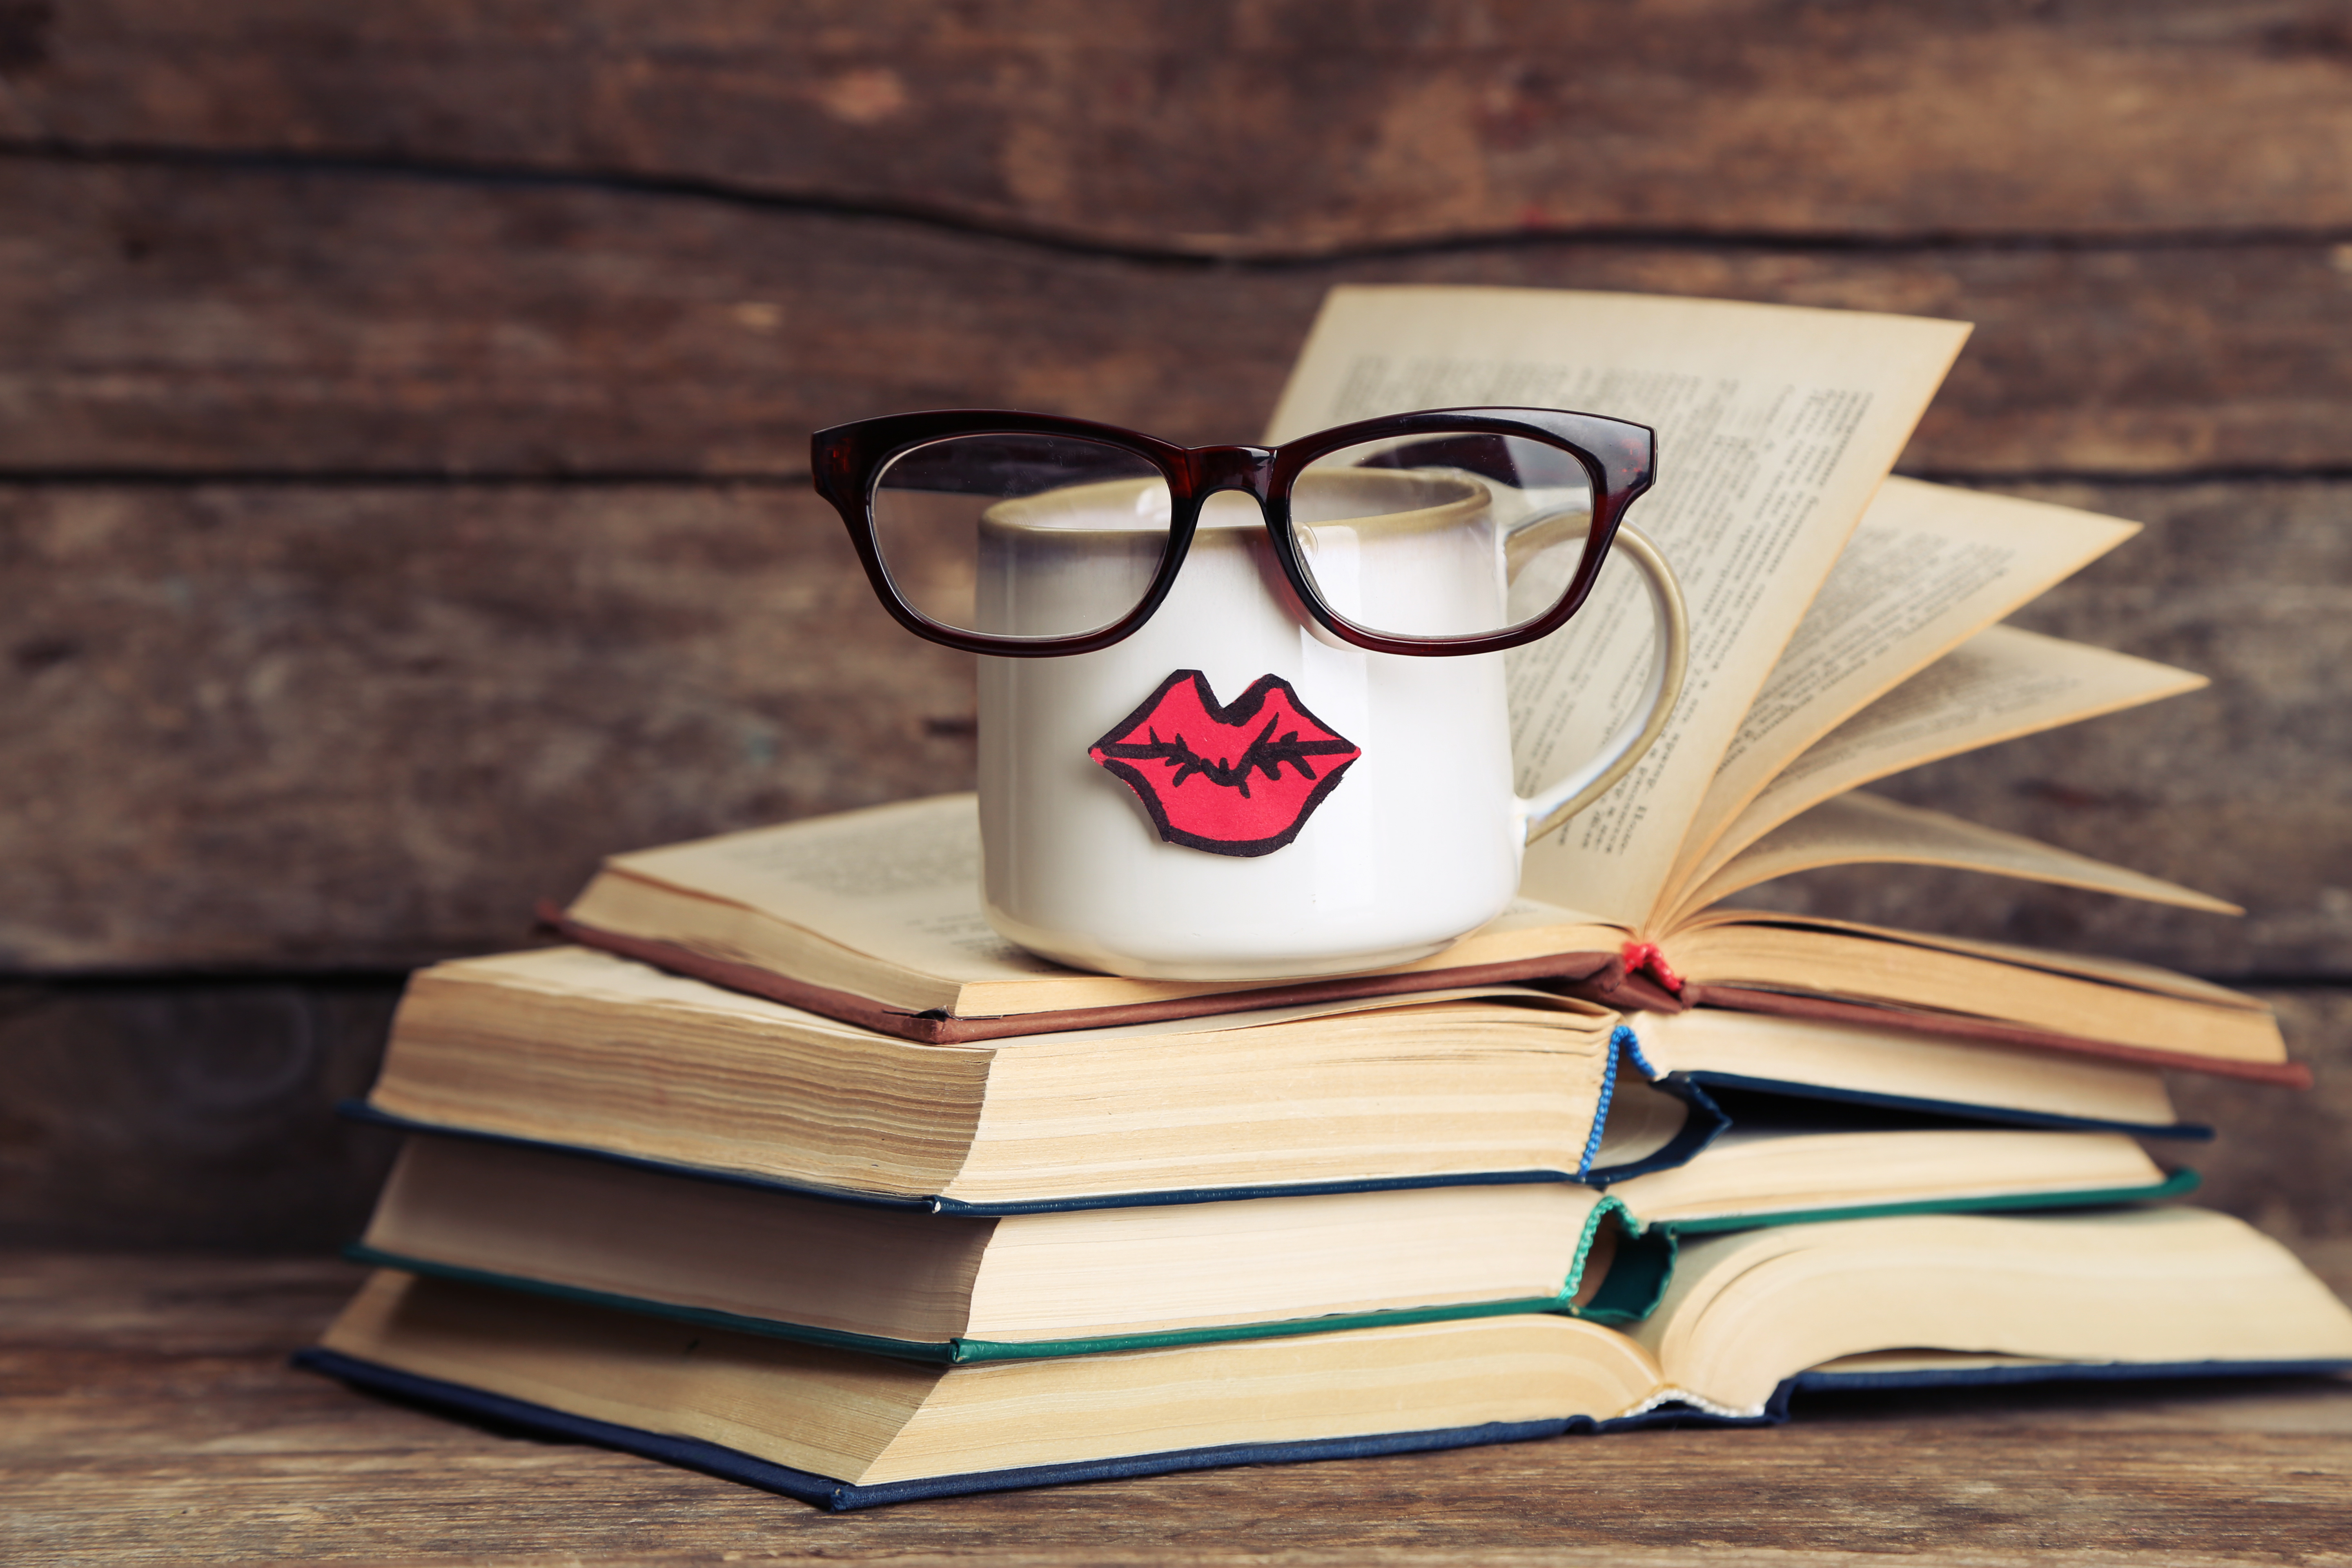 Book Cup Glasses Humor 5760x3840